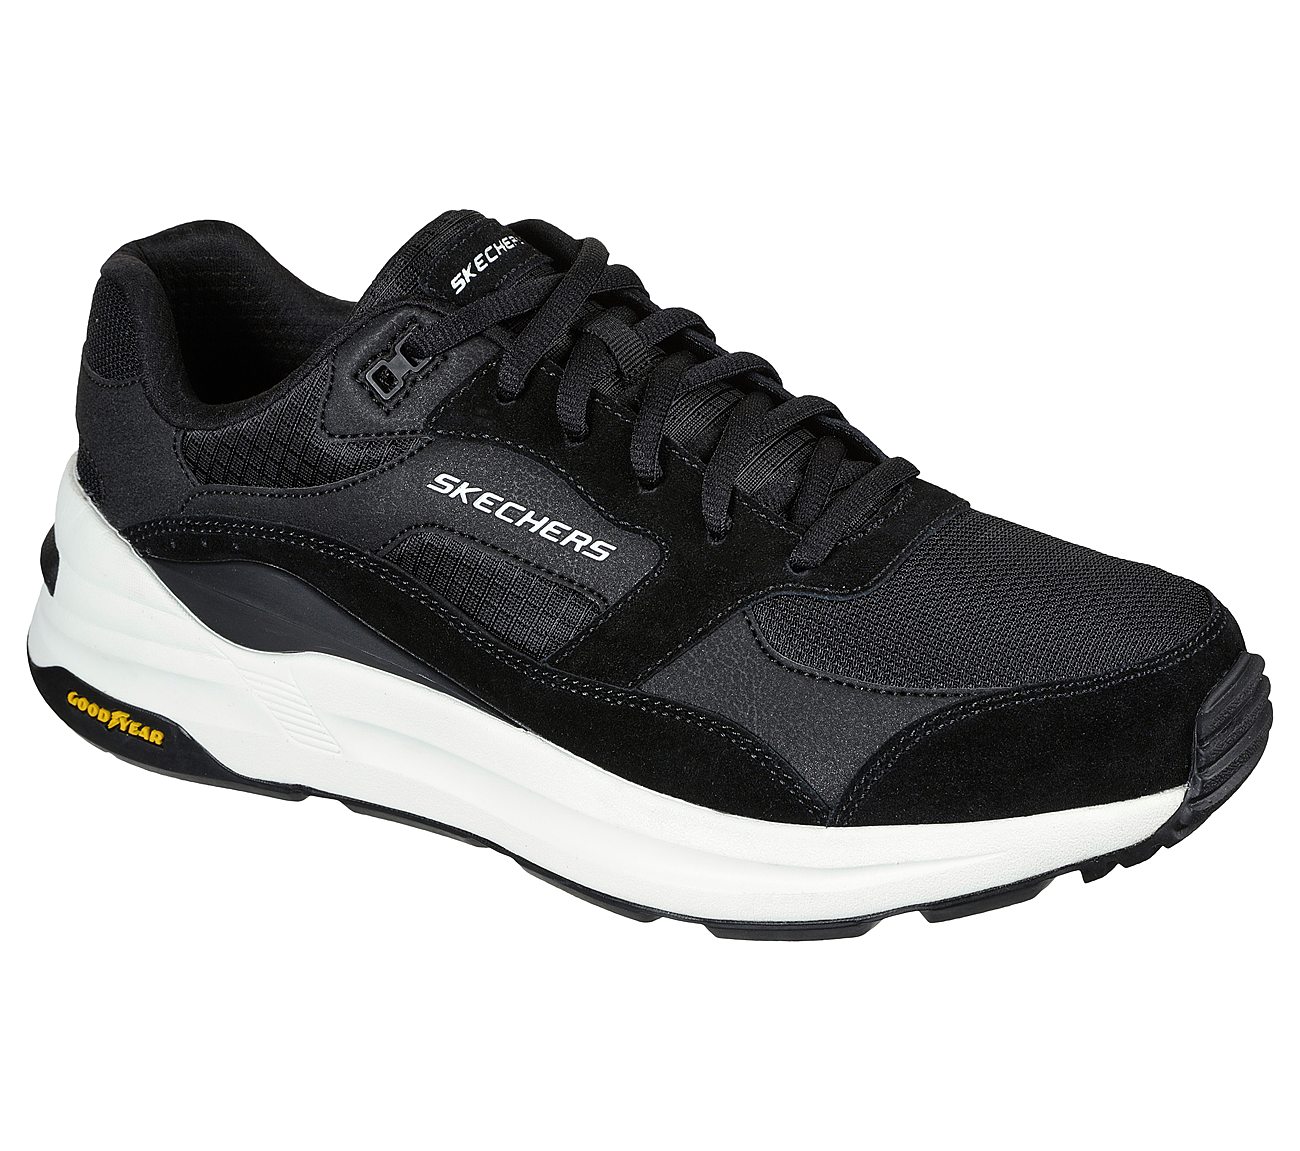 GLOBAL JOGGER, BLACK/WHITE Footwear Lateral View